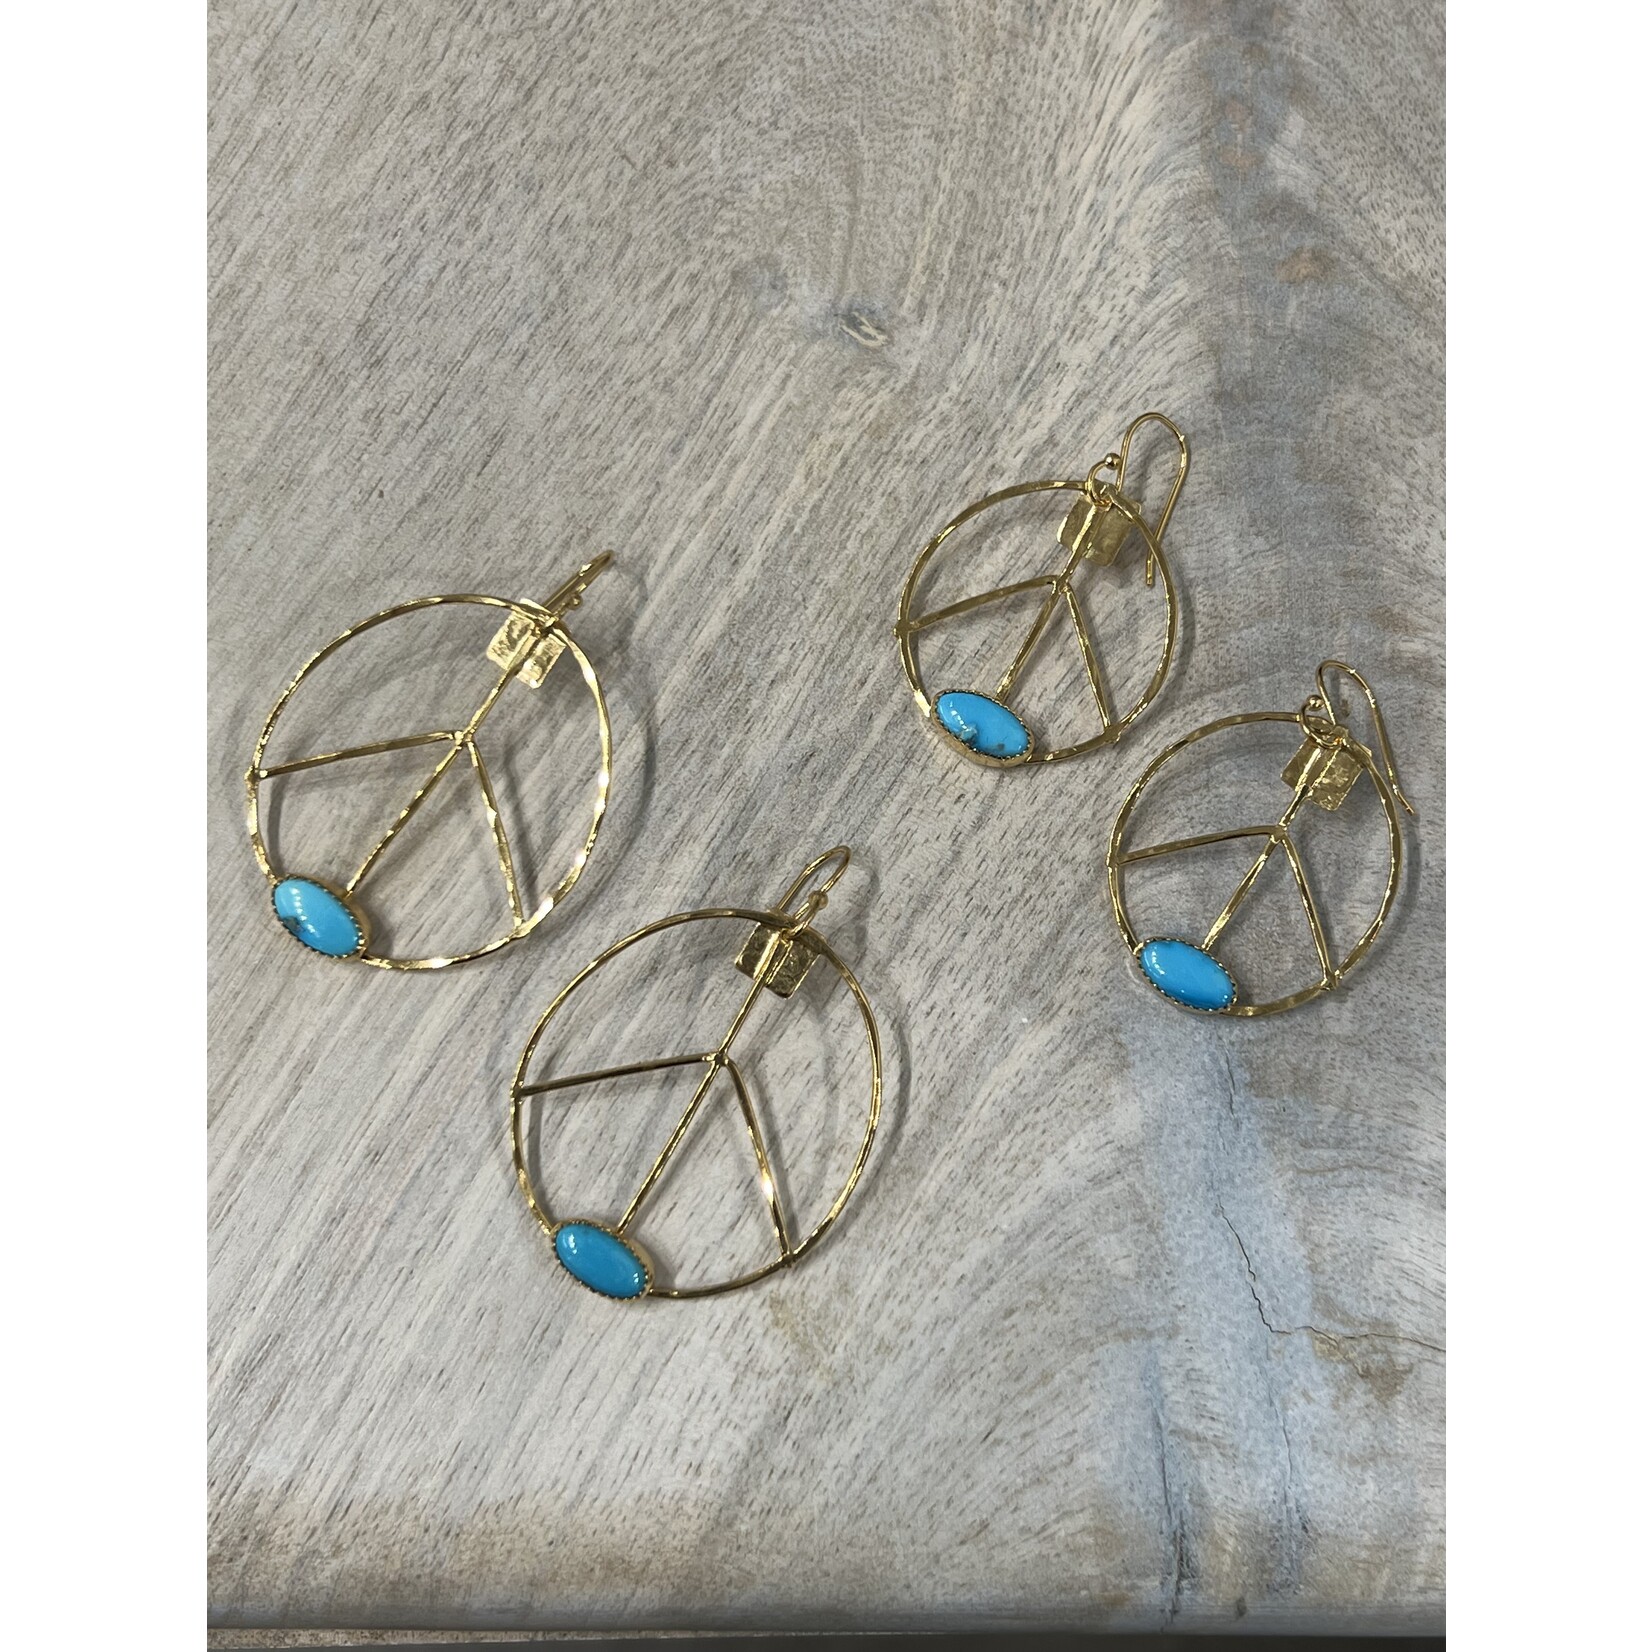 DeNev X-Small 18K Yellow Gold Vermeil Peace Sign Earrings with Morenci Turquoise Oval Droplets